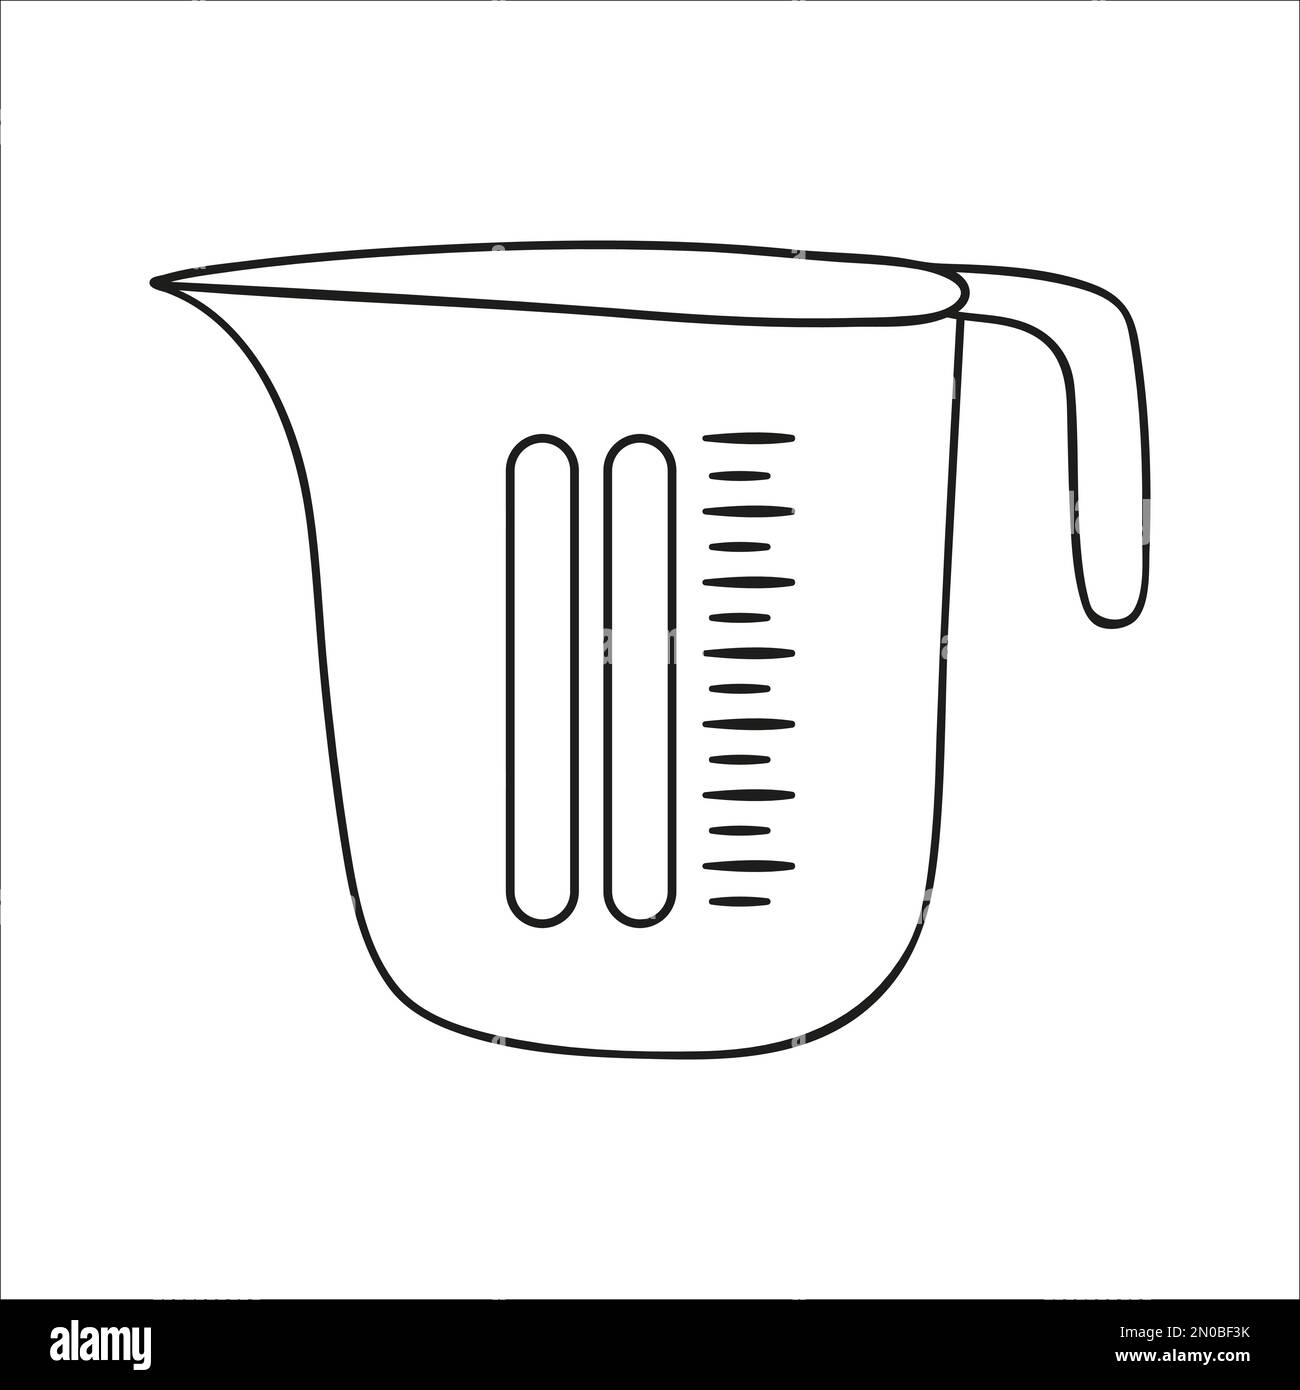 Measuring cup Black and White Stock Photos & Images - Alamy